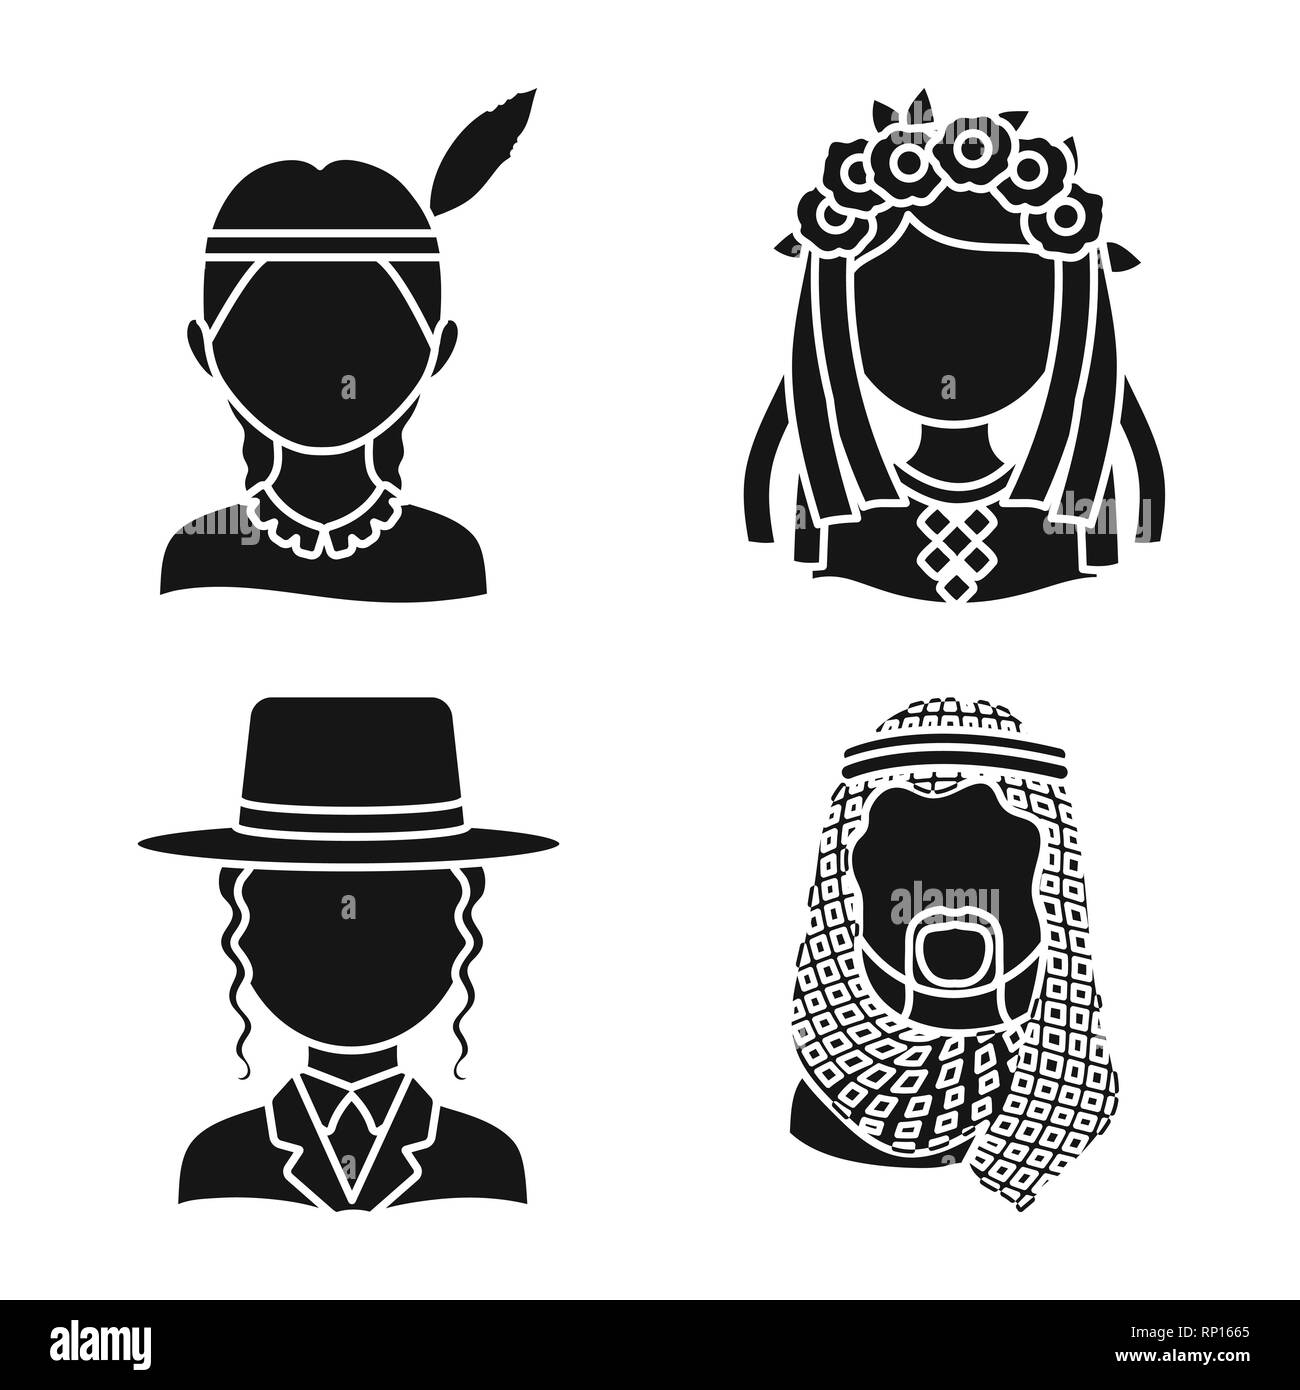 Vector illustration of person and culture logo. Collection of person and race  stock vector illustration. Stock Vector